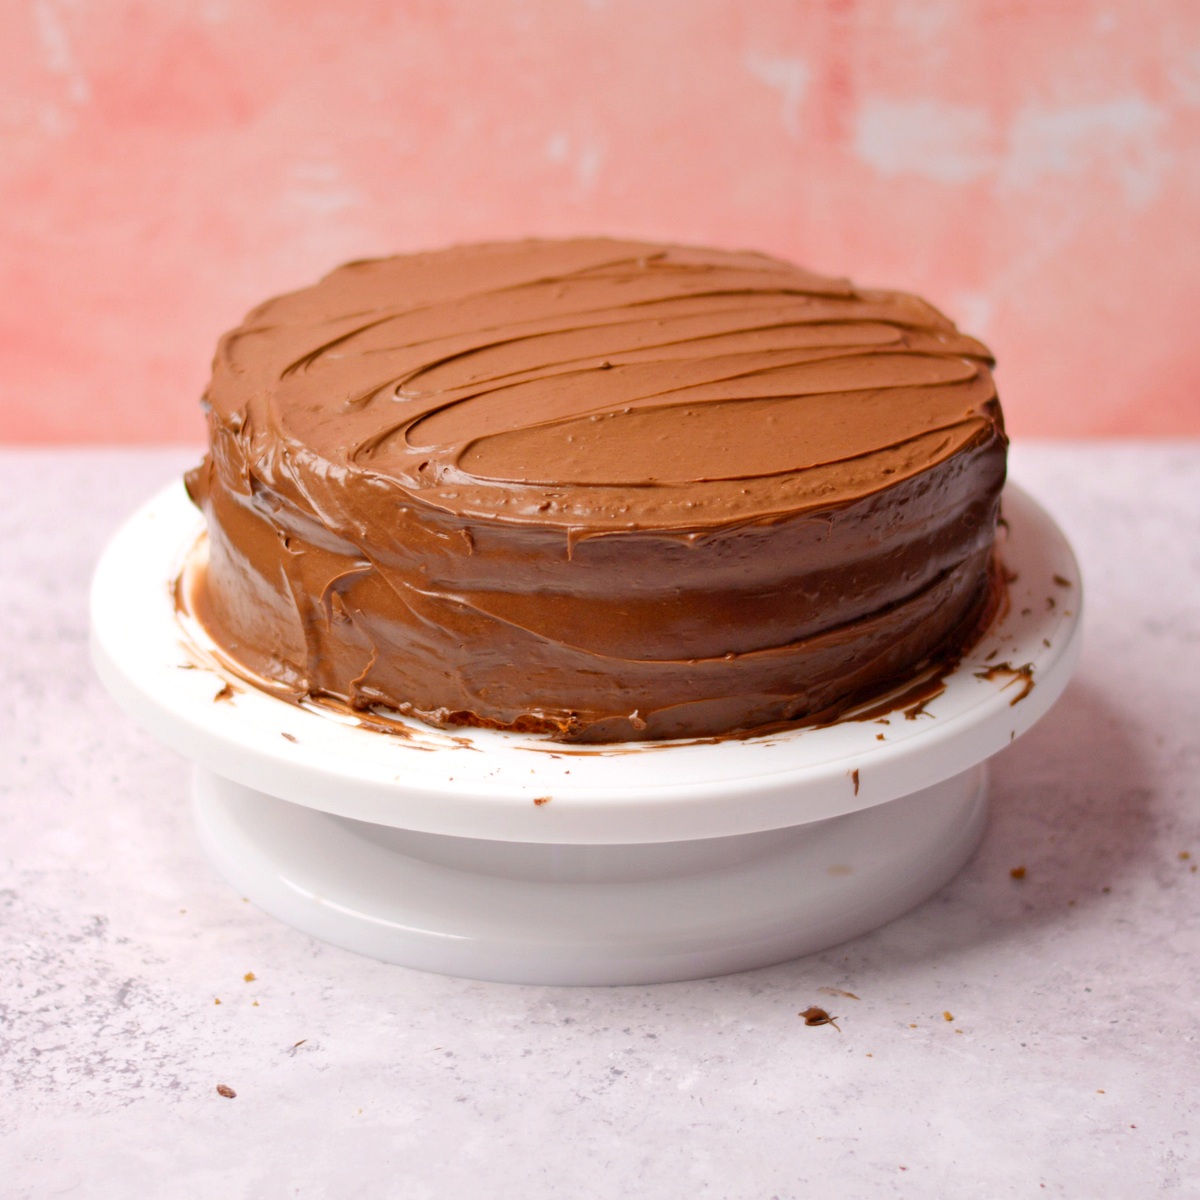 Chocolate frosting spread on a round cake.